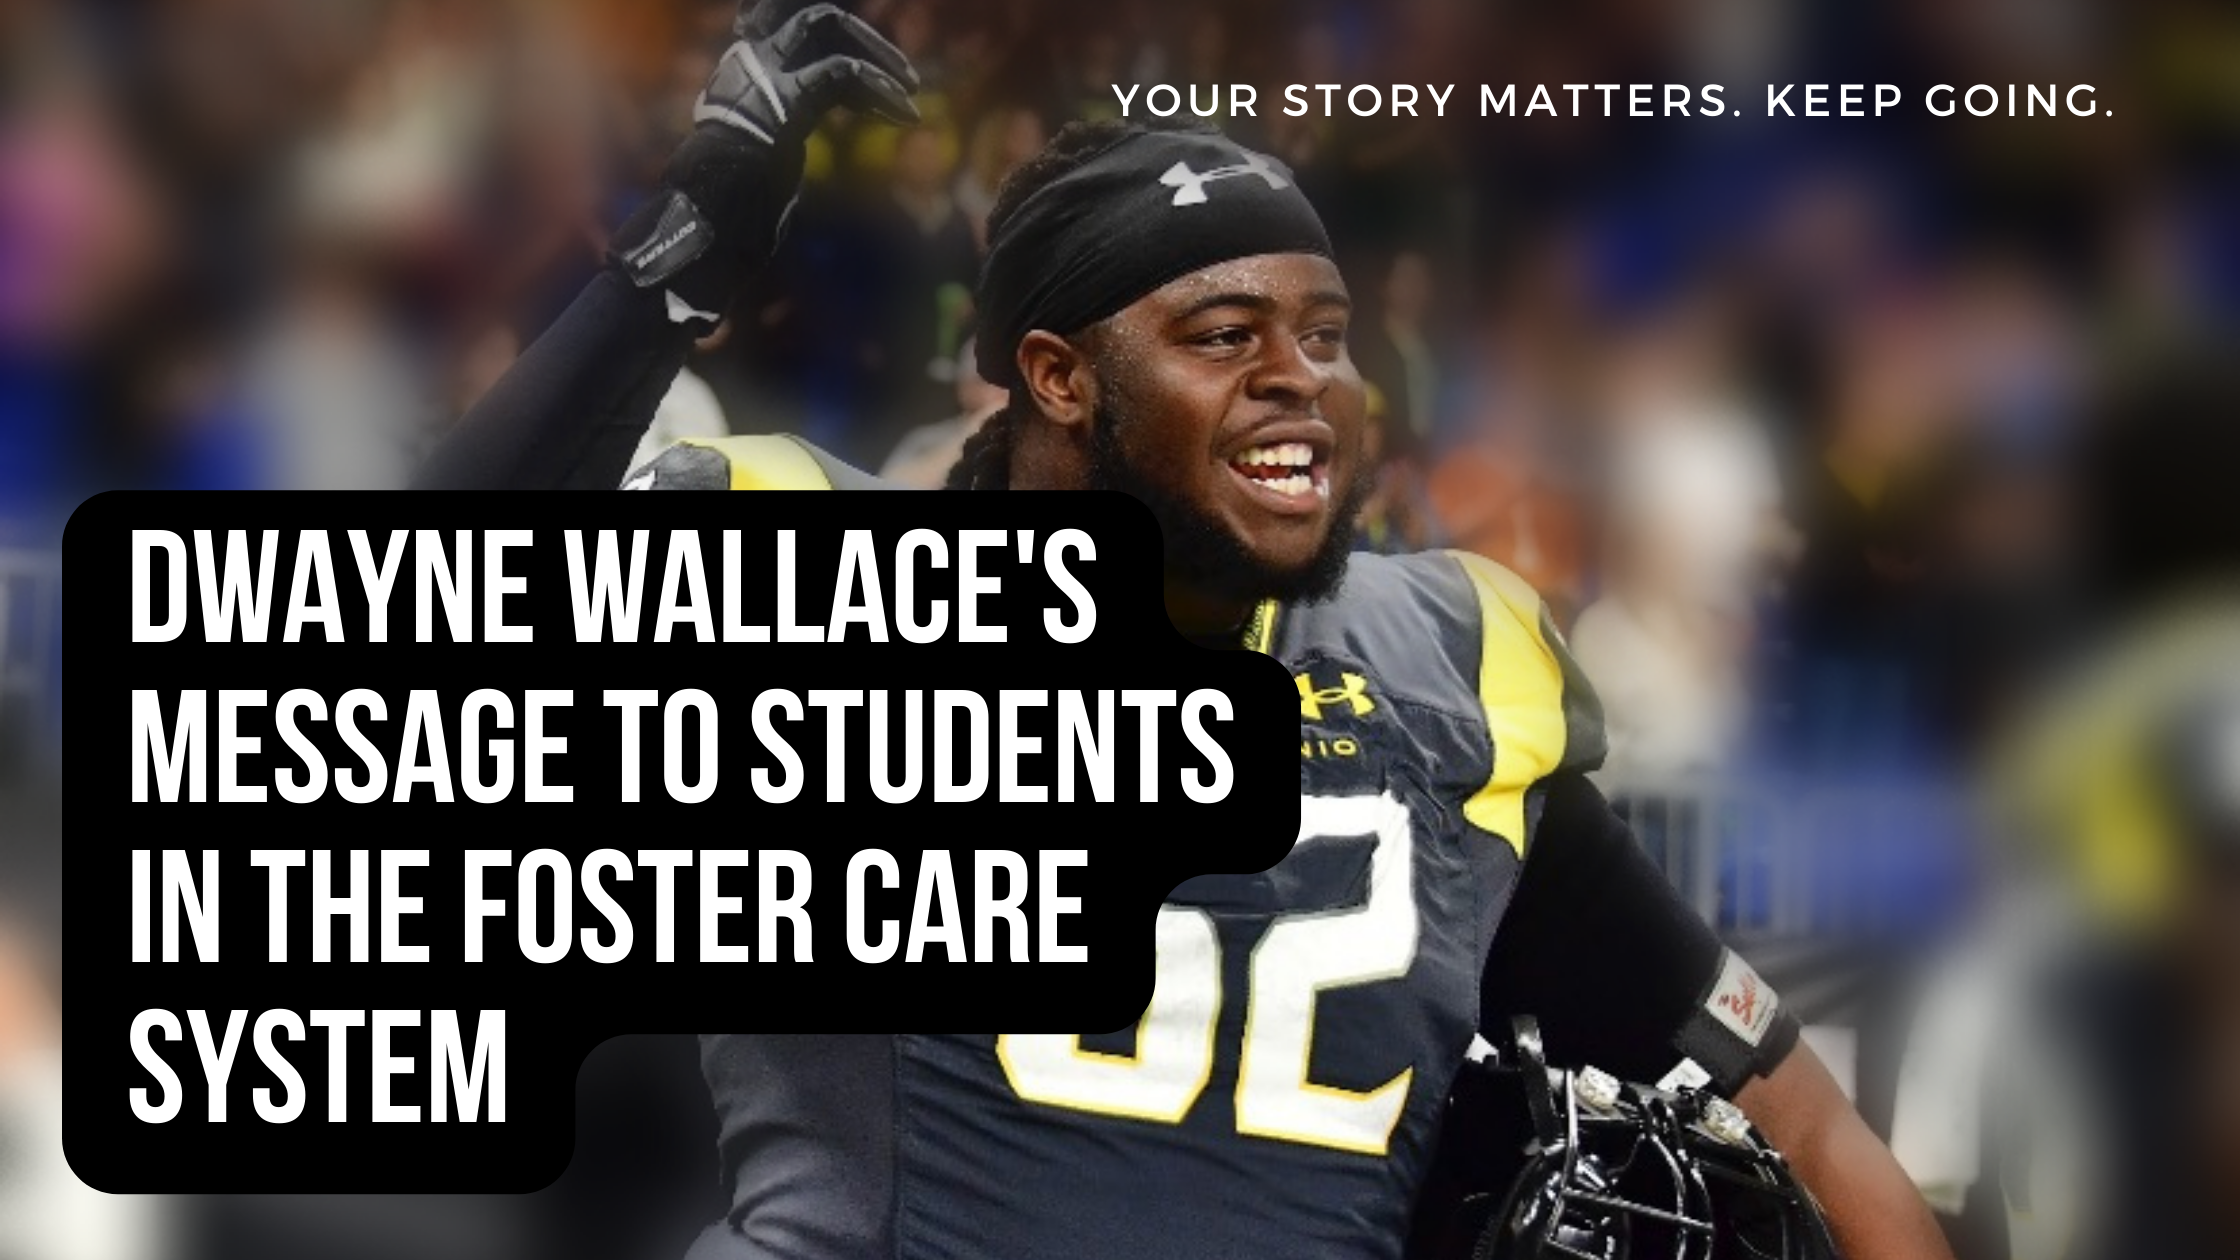 A Message from Dwayne Wallace to Students in the Foster Care System